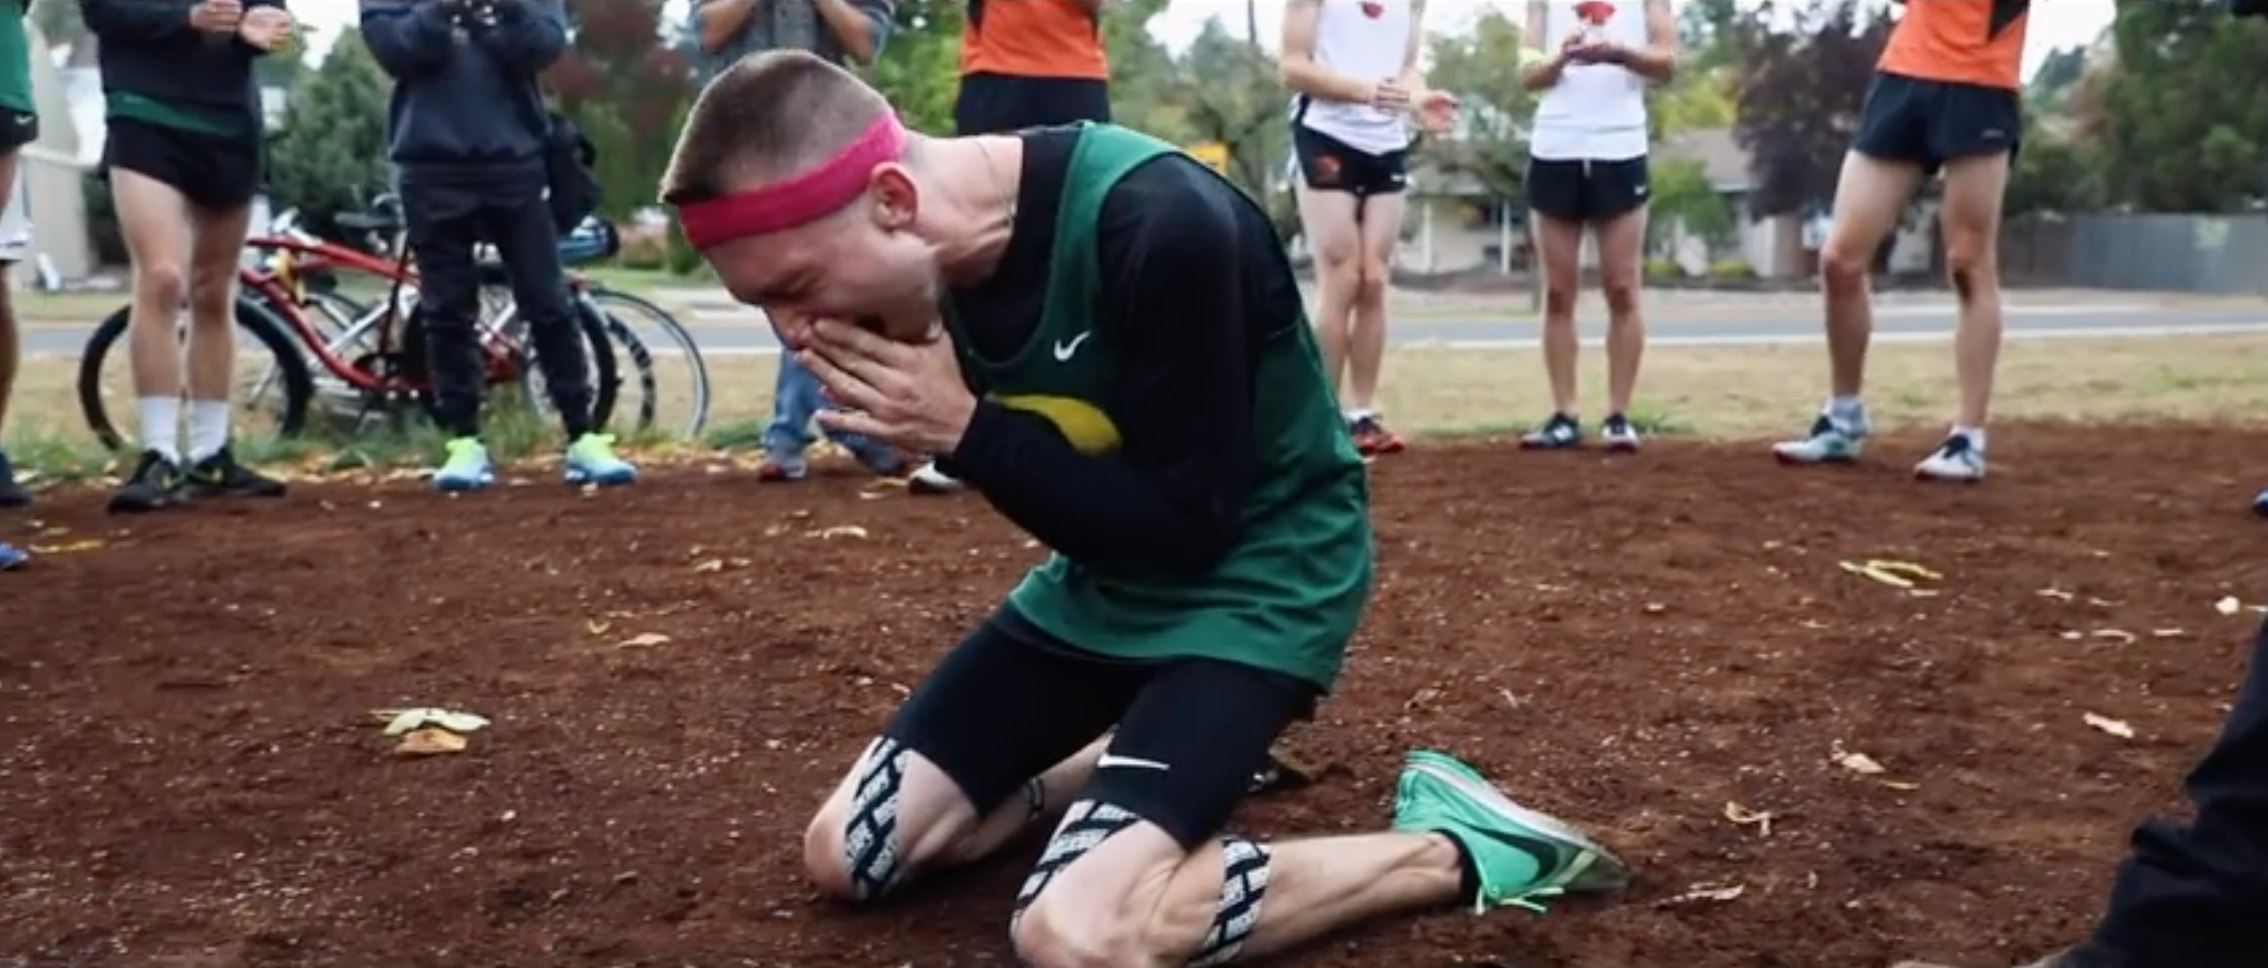 Image of a white man, college age, wearing a green Oregon State jersey and running gear, kneels on the dirt ground, hands to his face while he sobs.